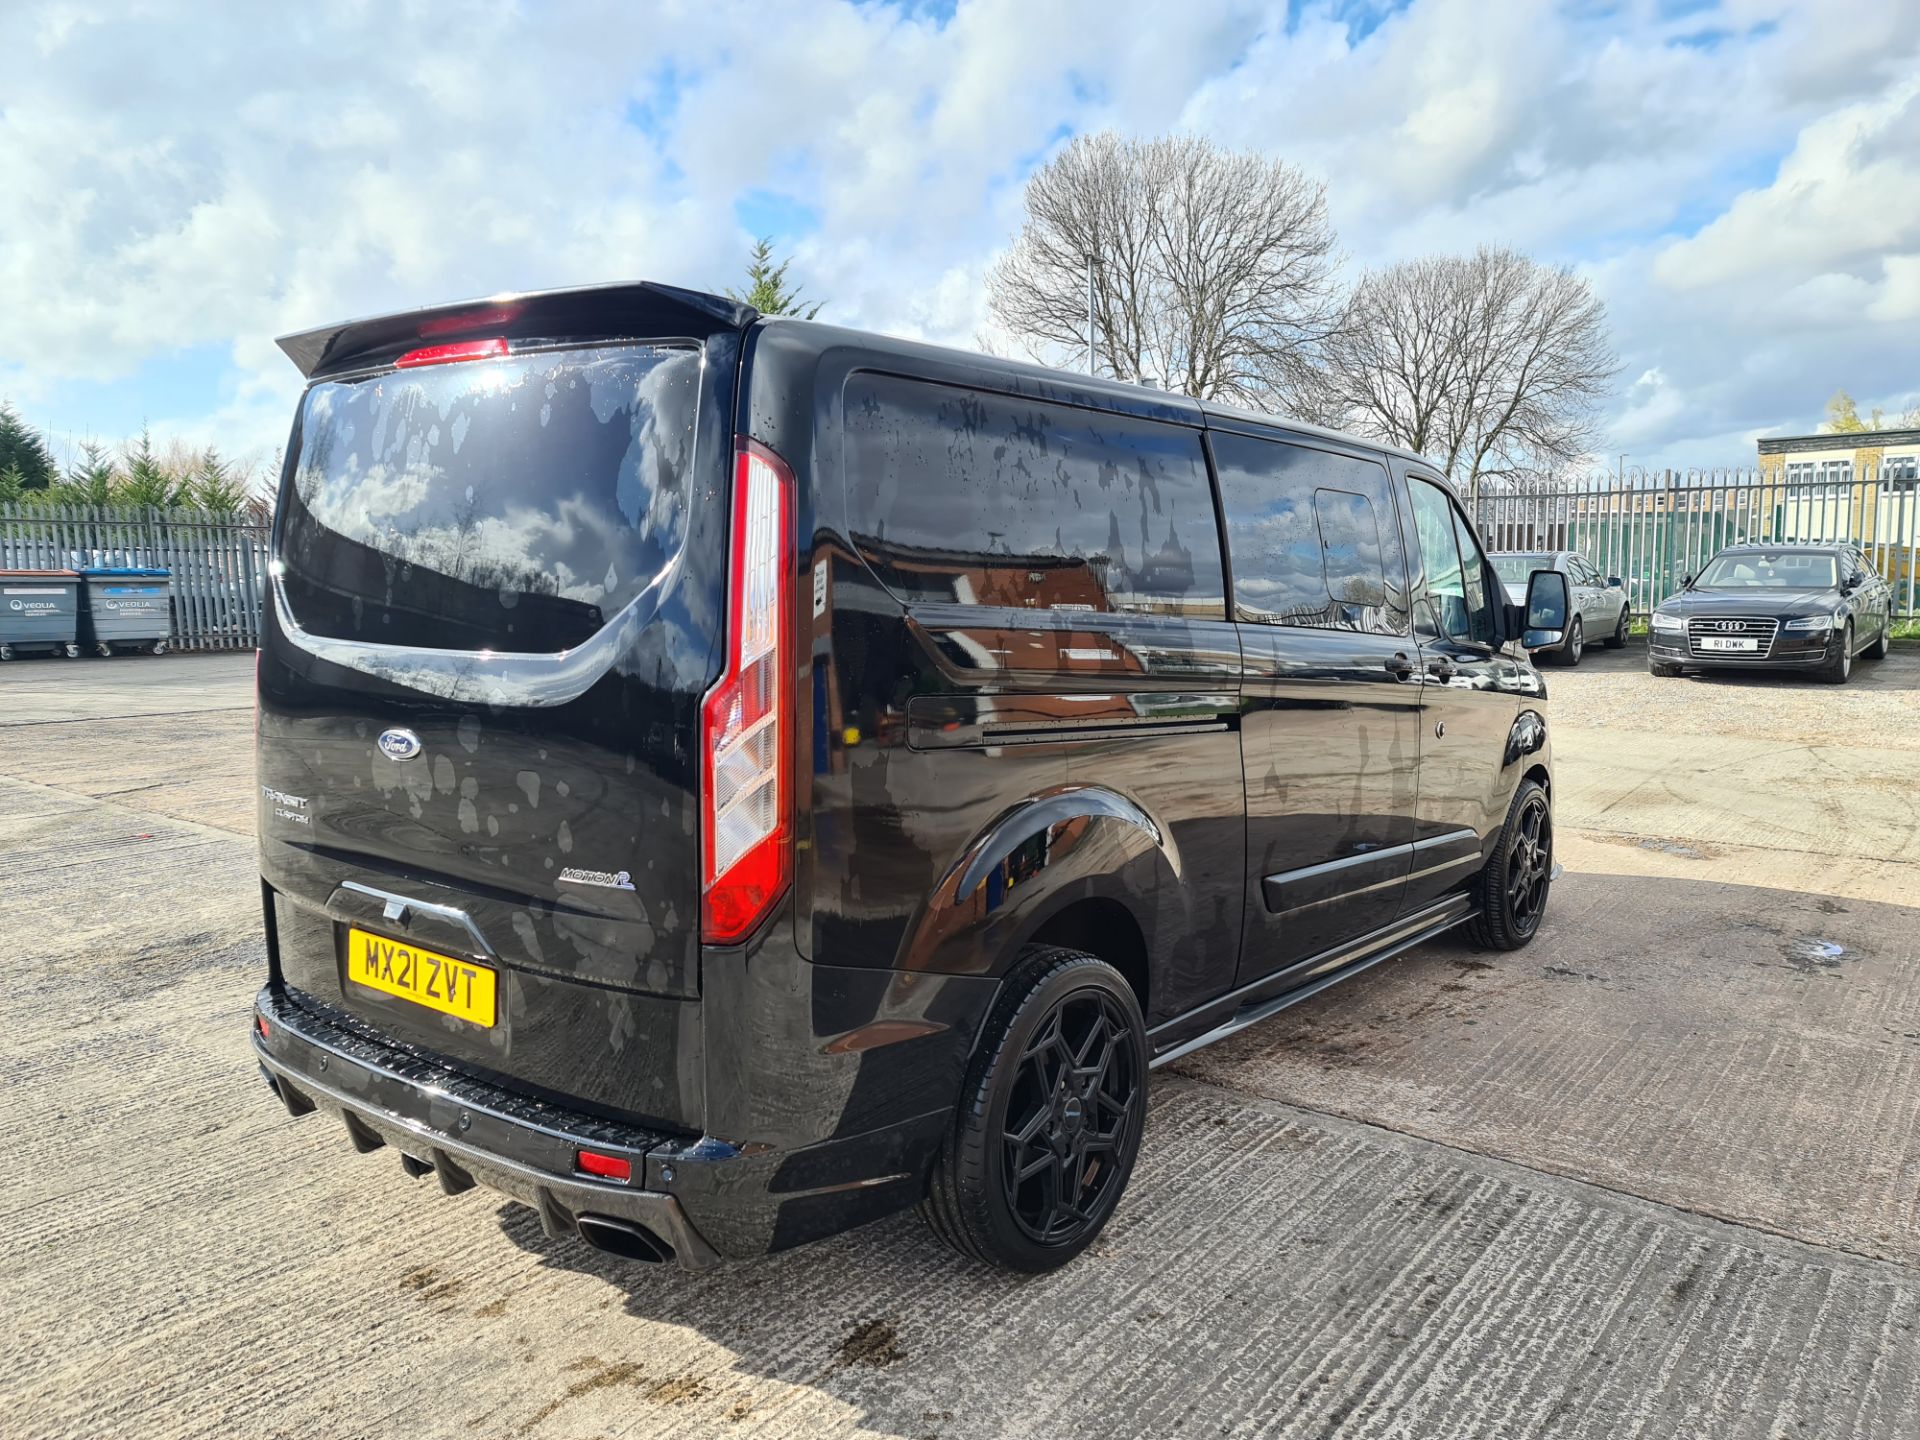 2021 Ford Transit 320LMTD Motion R panel van, auto gearbox, Ultra High Spec - Image 3 of 102